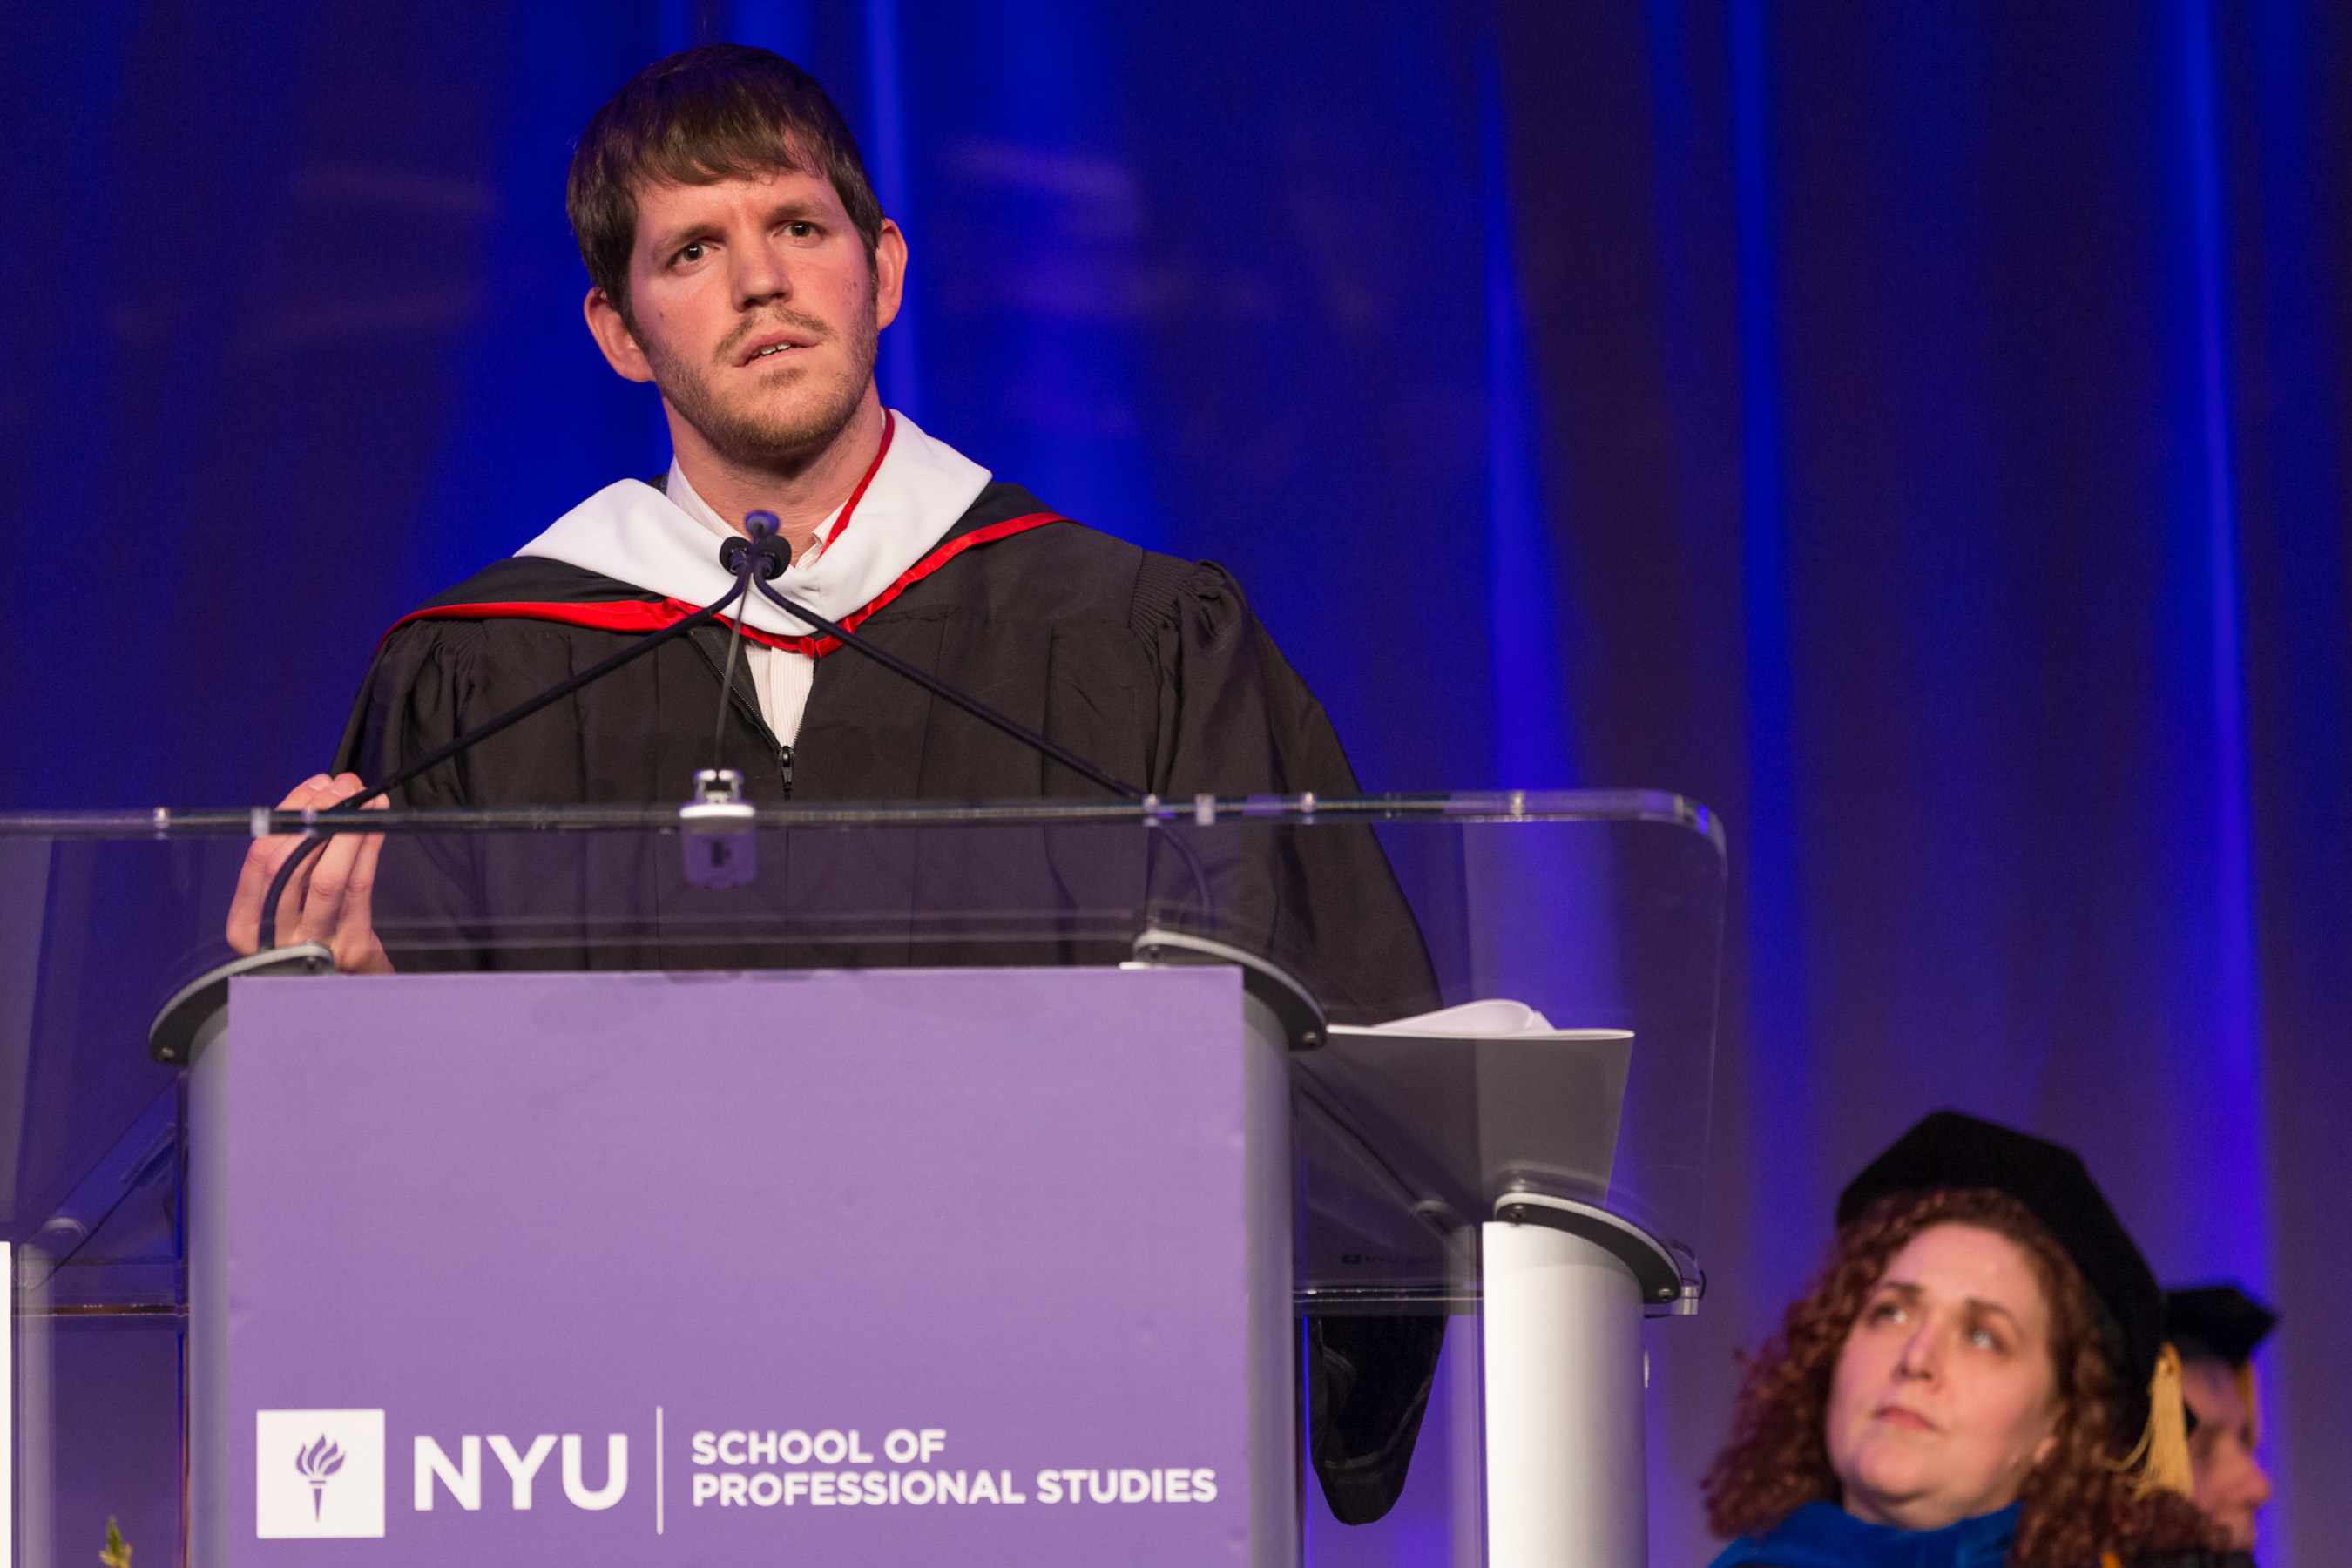 Acclaimed Photographer & Founder of Humans Of New York, Brandon Stanton, delivered a stirring speech to graduates of the NYU School of Professional Studies (NYUSPS), who received their degrees at the Undergraduate Convocation ceremony on May 15 at the Grand Hyatt New York. He reminded students that time is the most valuable resource in the world, and it should not be squandered. Instead, he urged them not to wait for their idea or plan to be perfect, but to take the step now to pursue their dreams. Photo Credit: NYUSPS/Mark McQueen